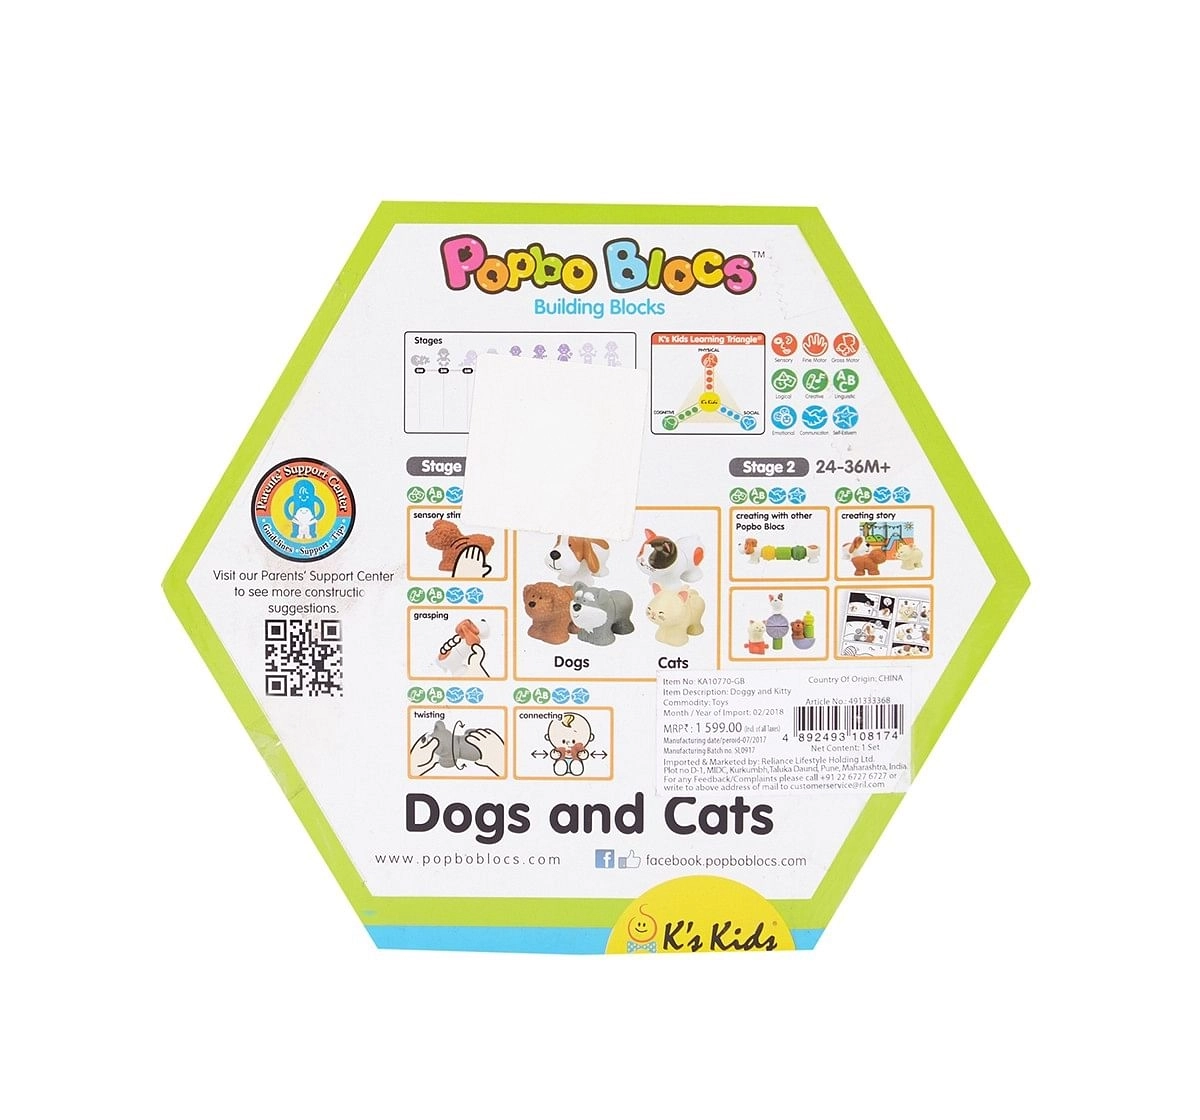  K'S Kids Doggy And Kitty Blocks - Multicolour New Born for Kids age 12M+ 